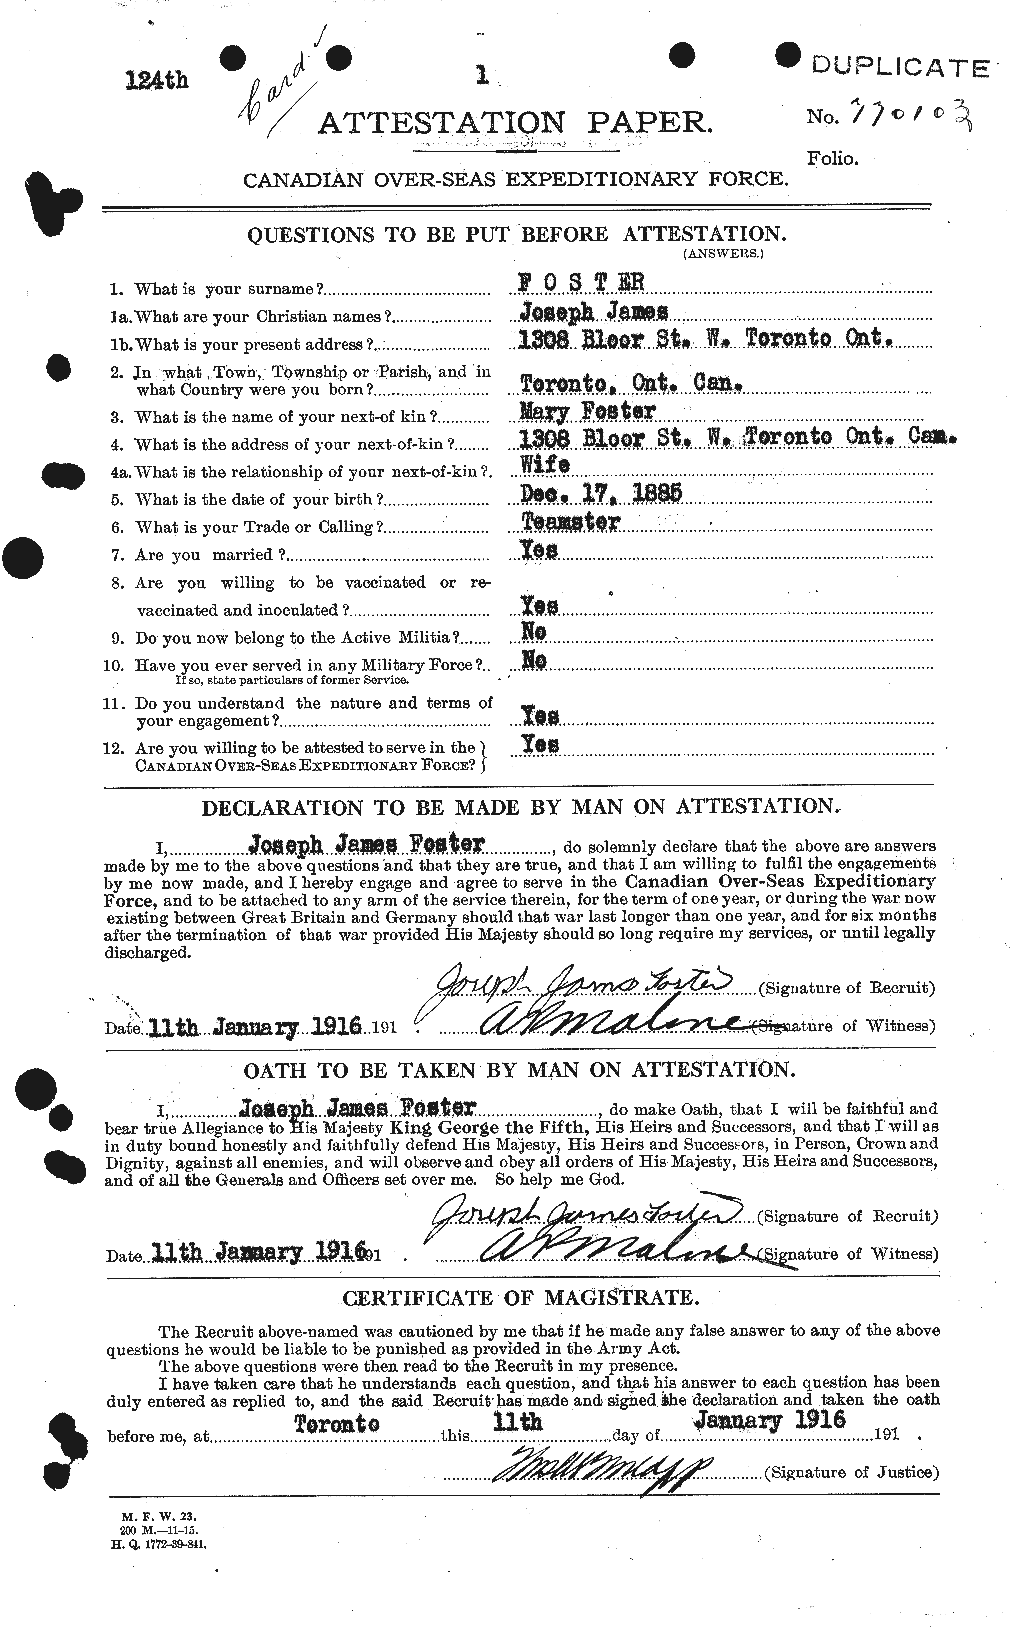 Personnel Records of the First World War - CEF 333388a